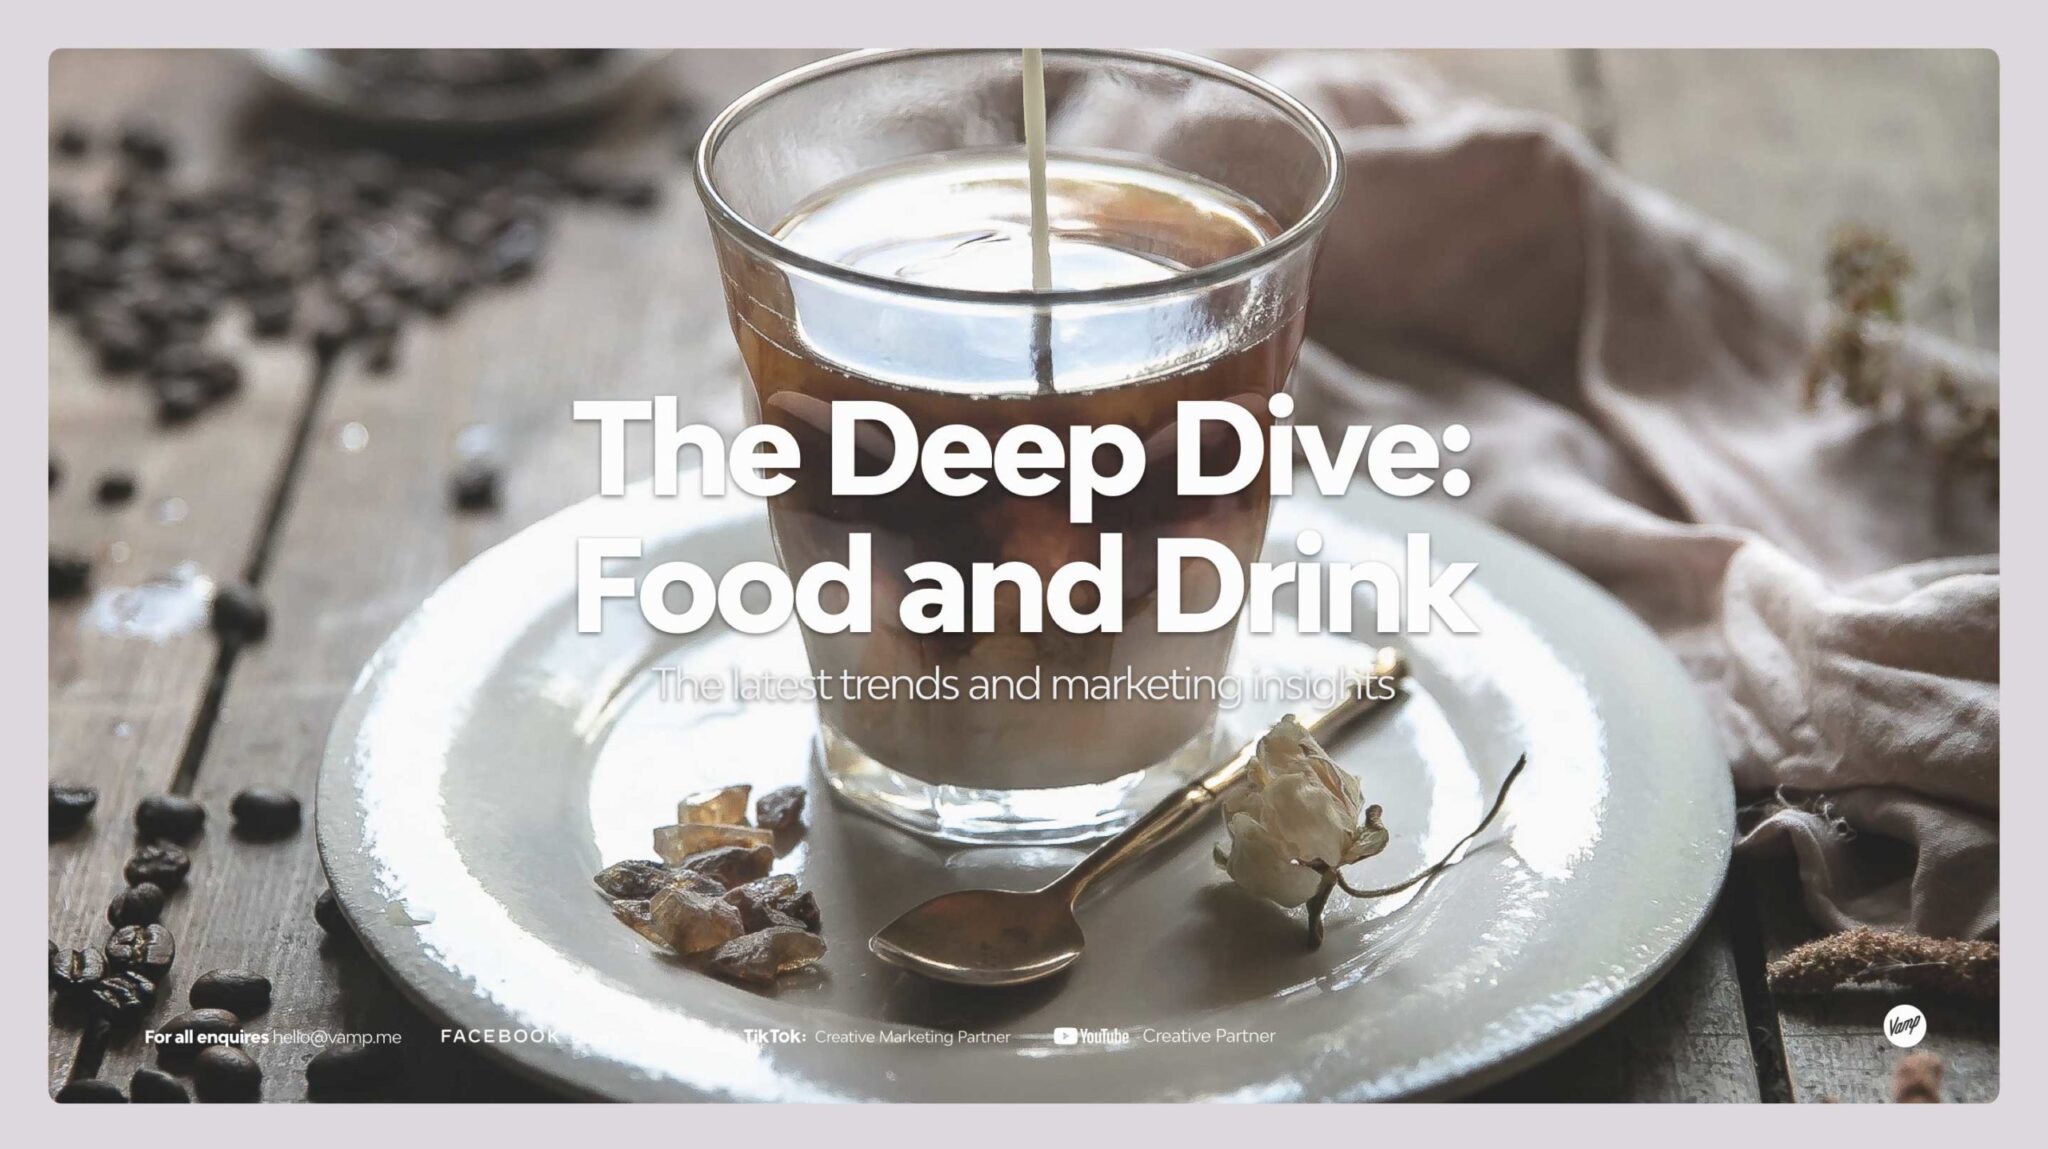 Download Vamp's free Deep Dive report on food and drink trends